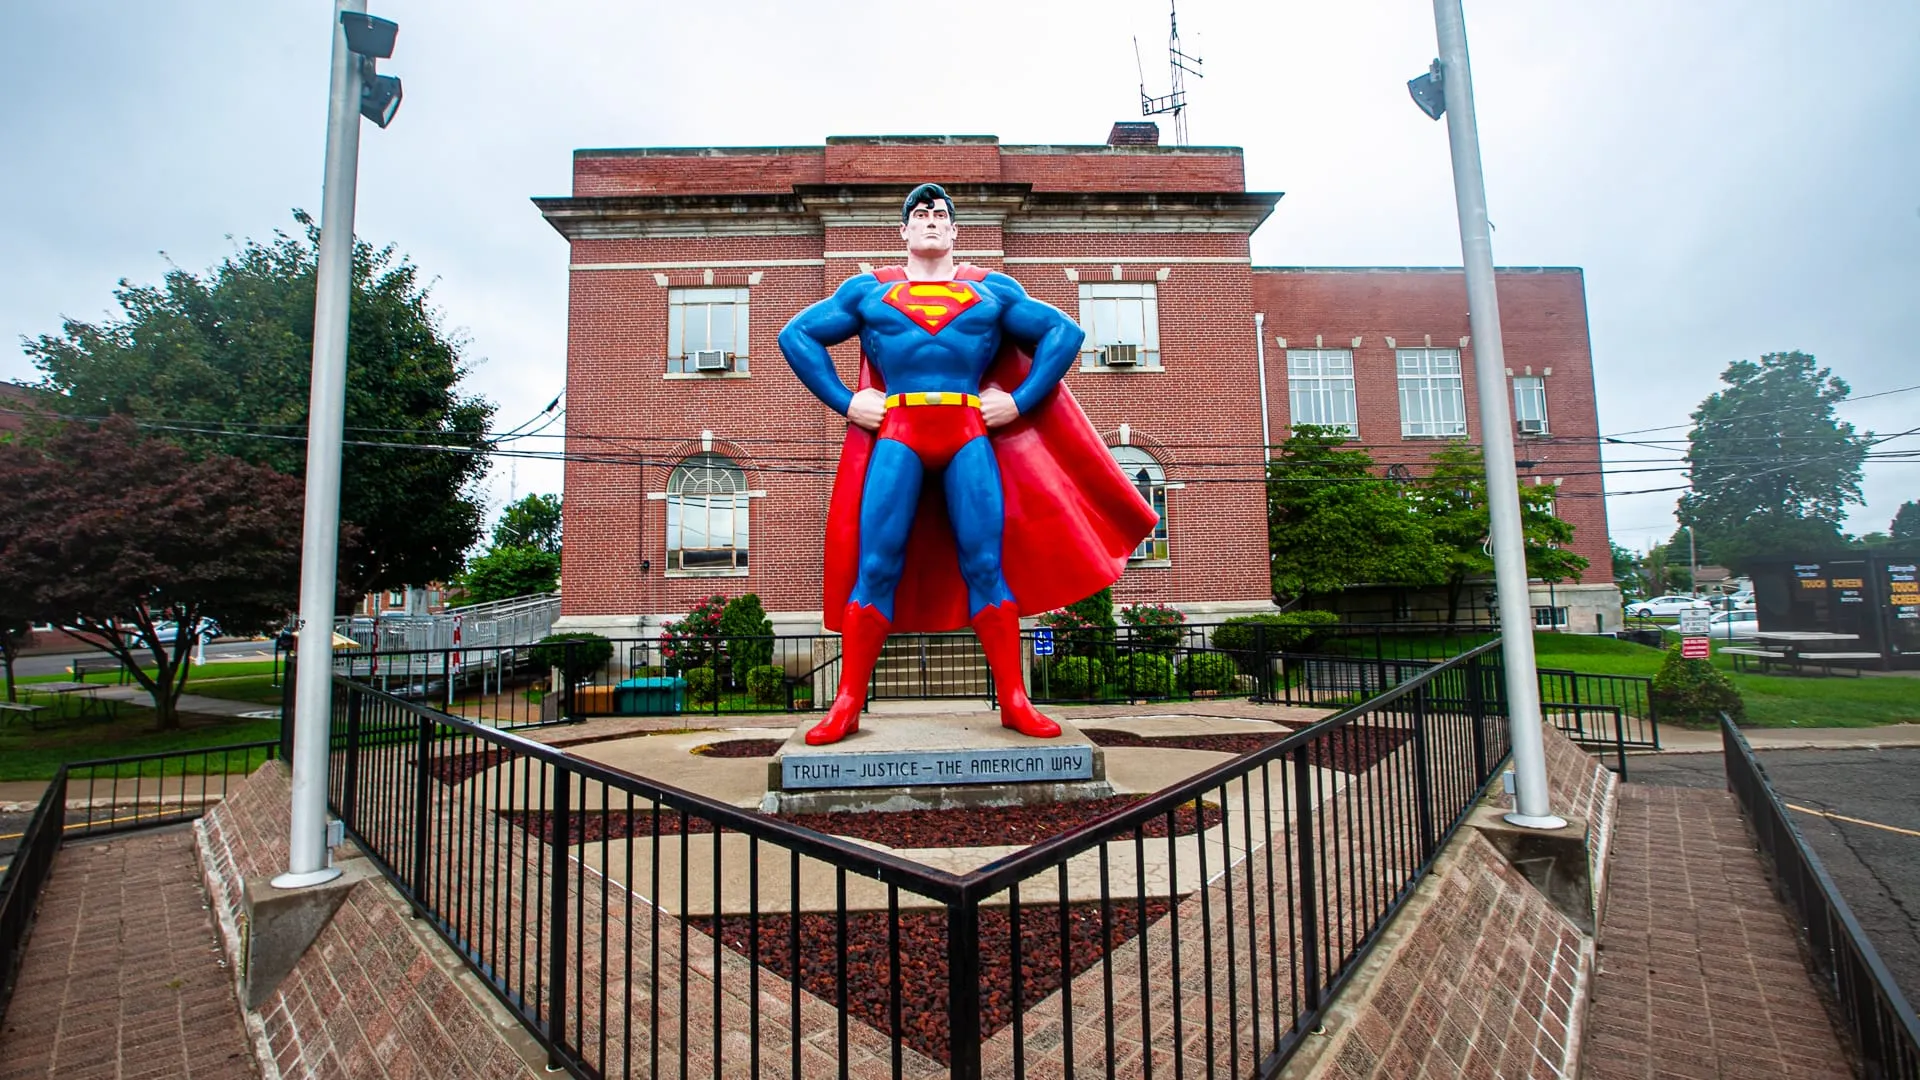 Giant Superman Statue- Roadside Attraction Superman Zoom Background Images for video conferencing backdrops.